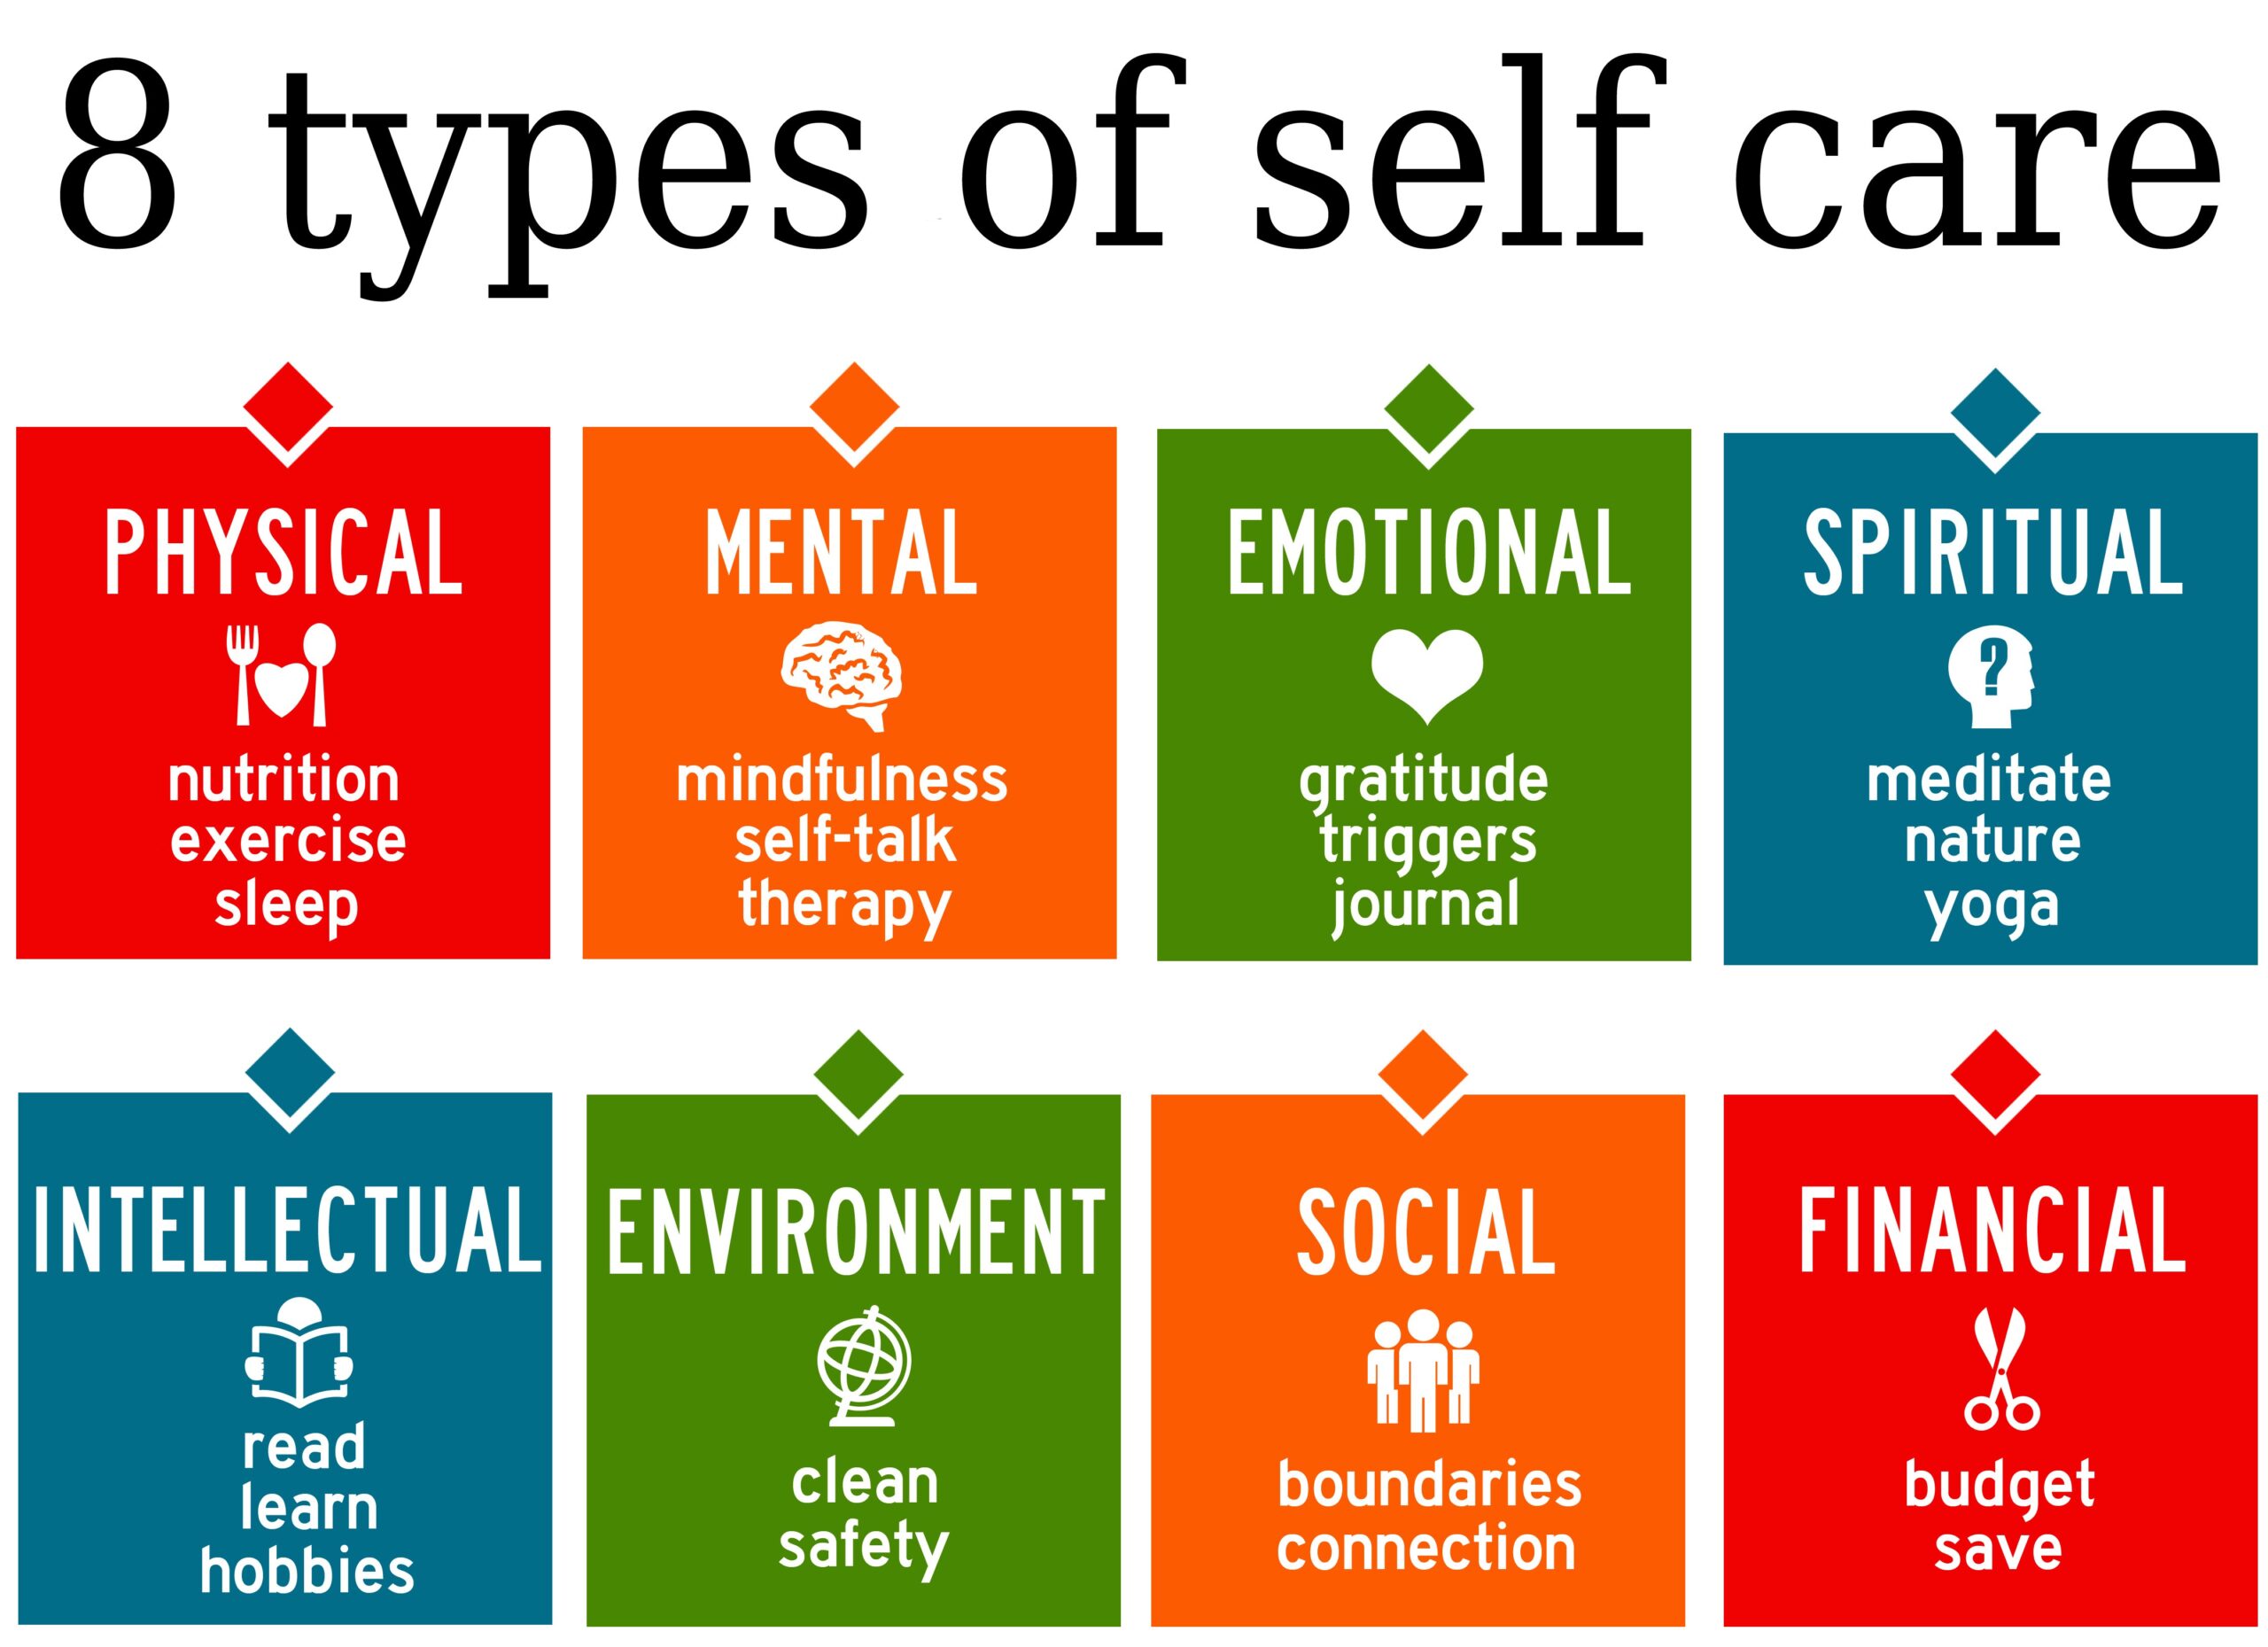 5 Types of Self-Care for Every Area of Your Life